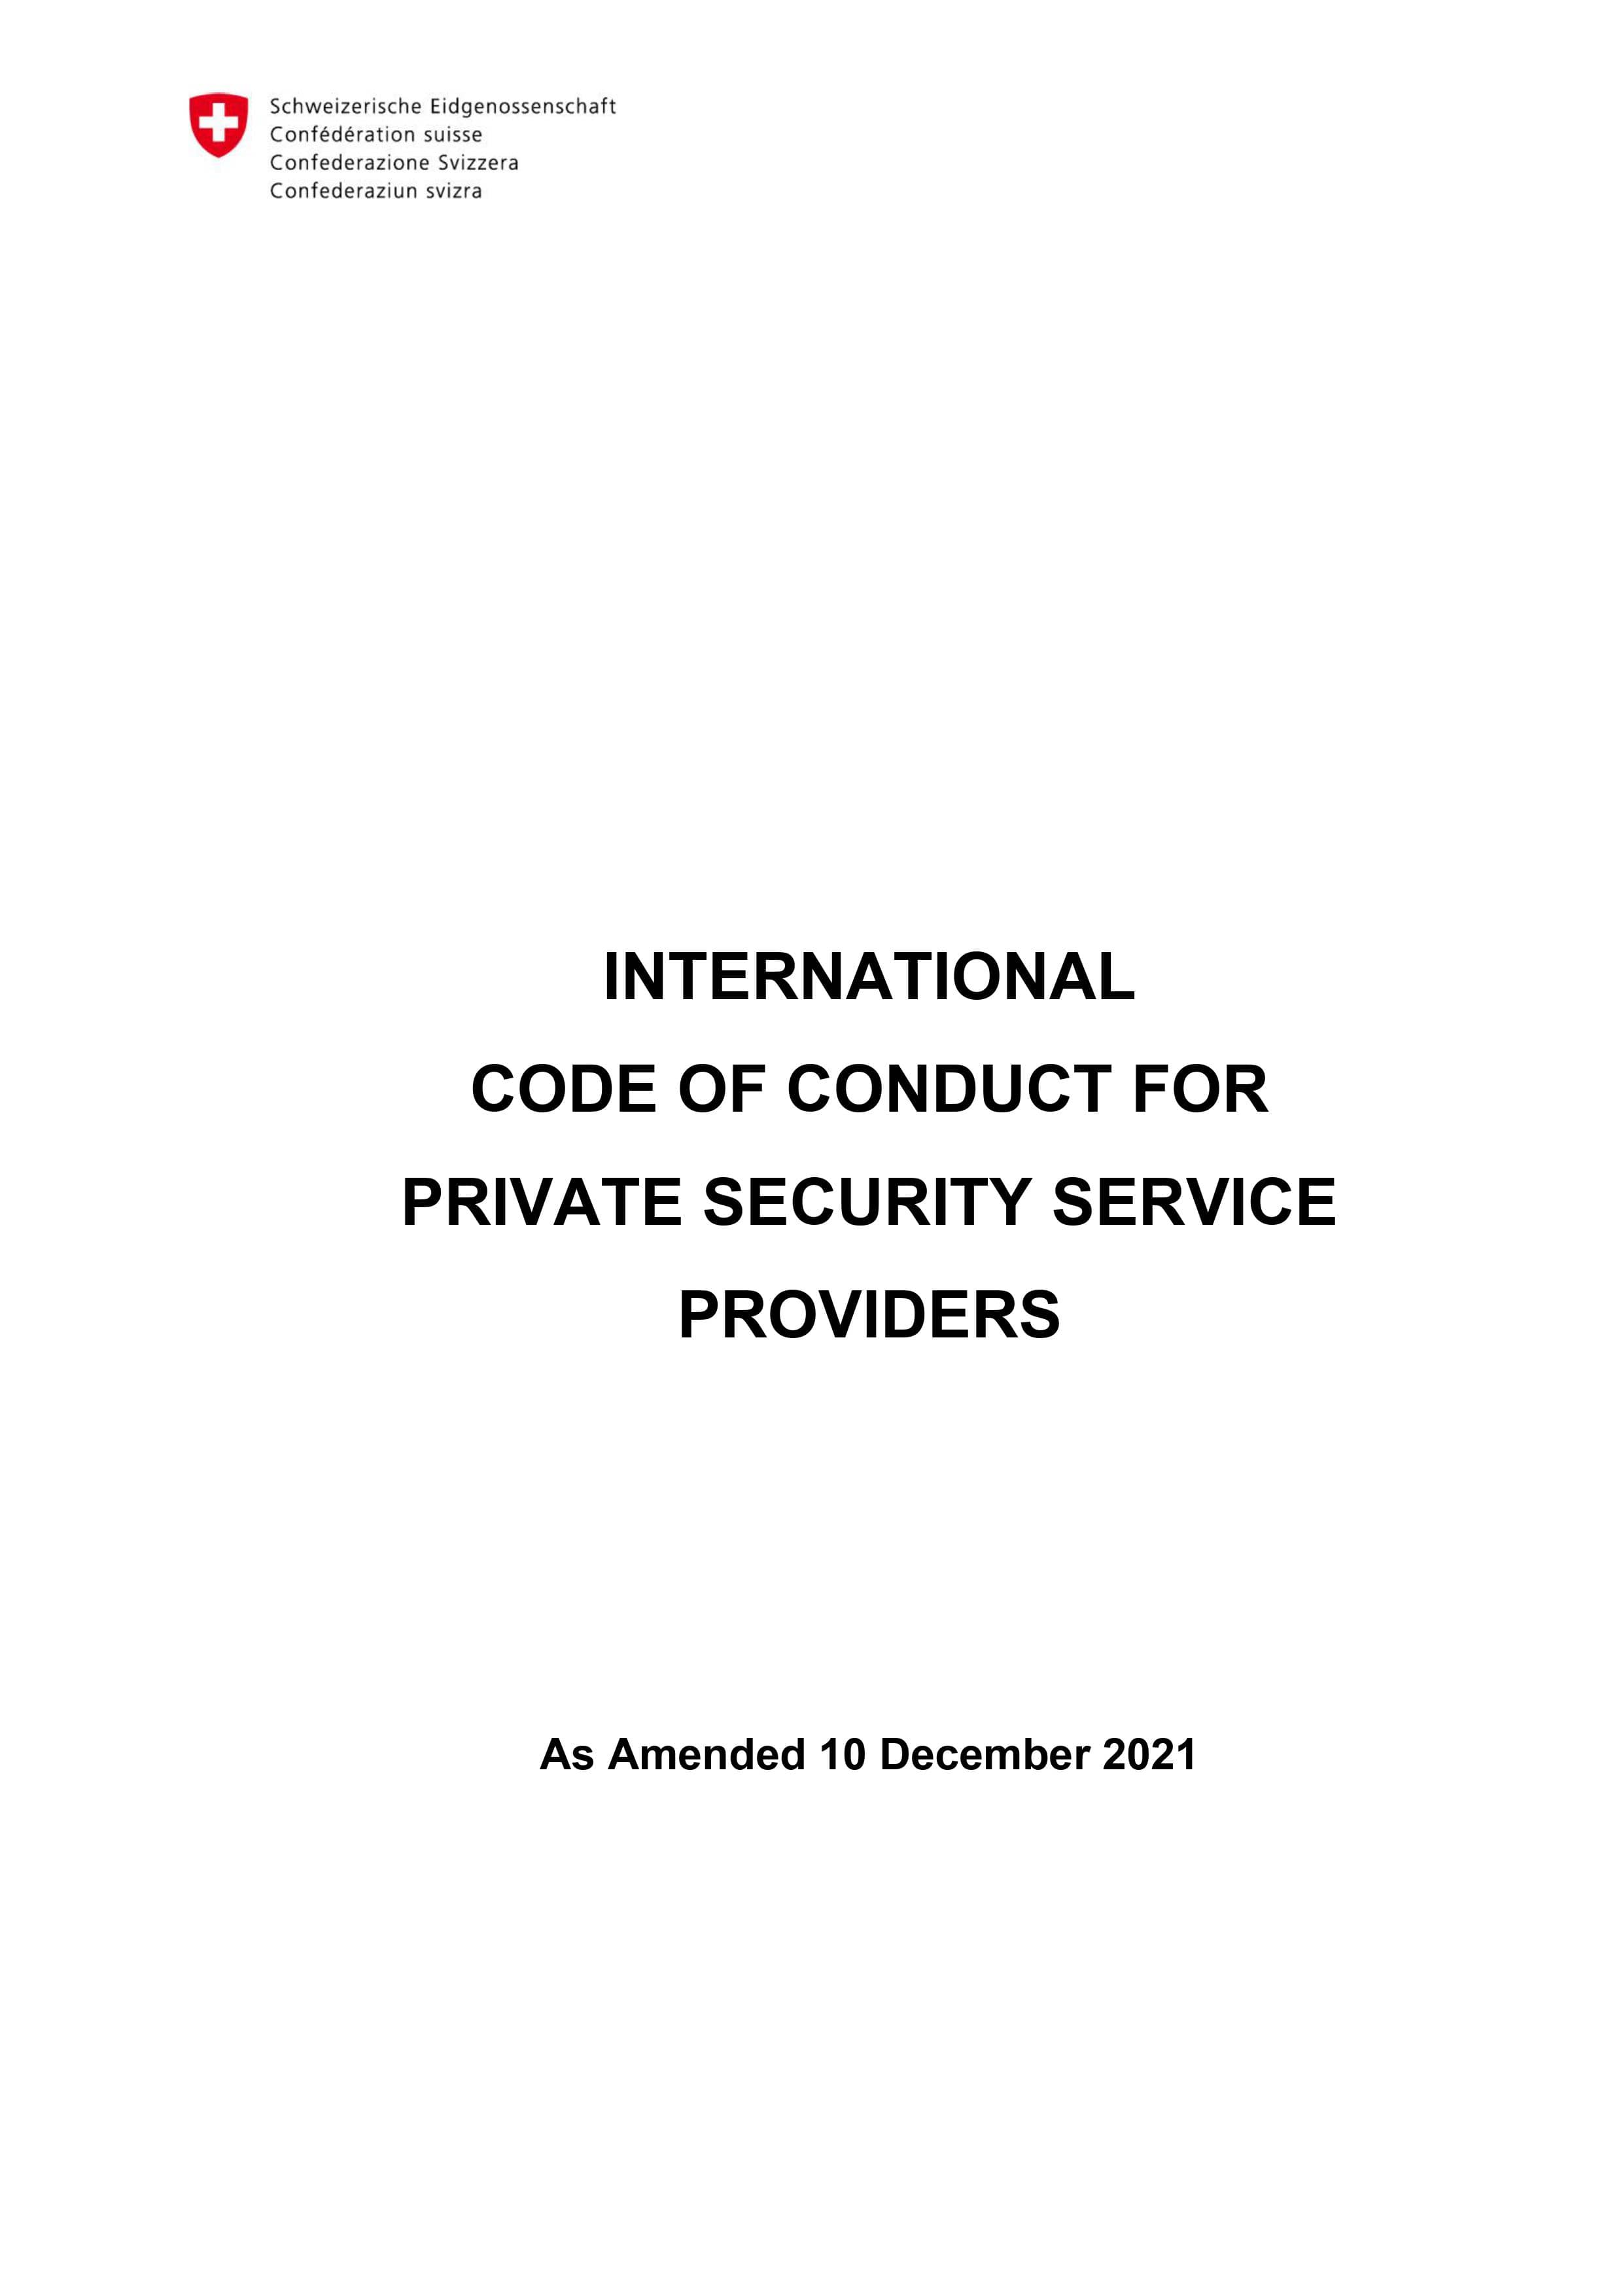 International Code of Conduct for Private Security Service Providers (ICoC, 2021)